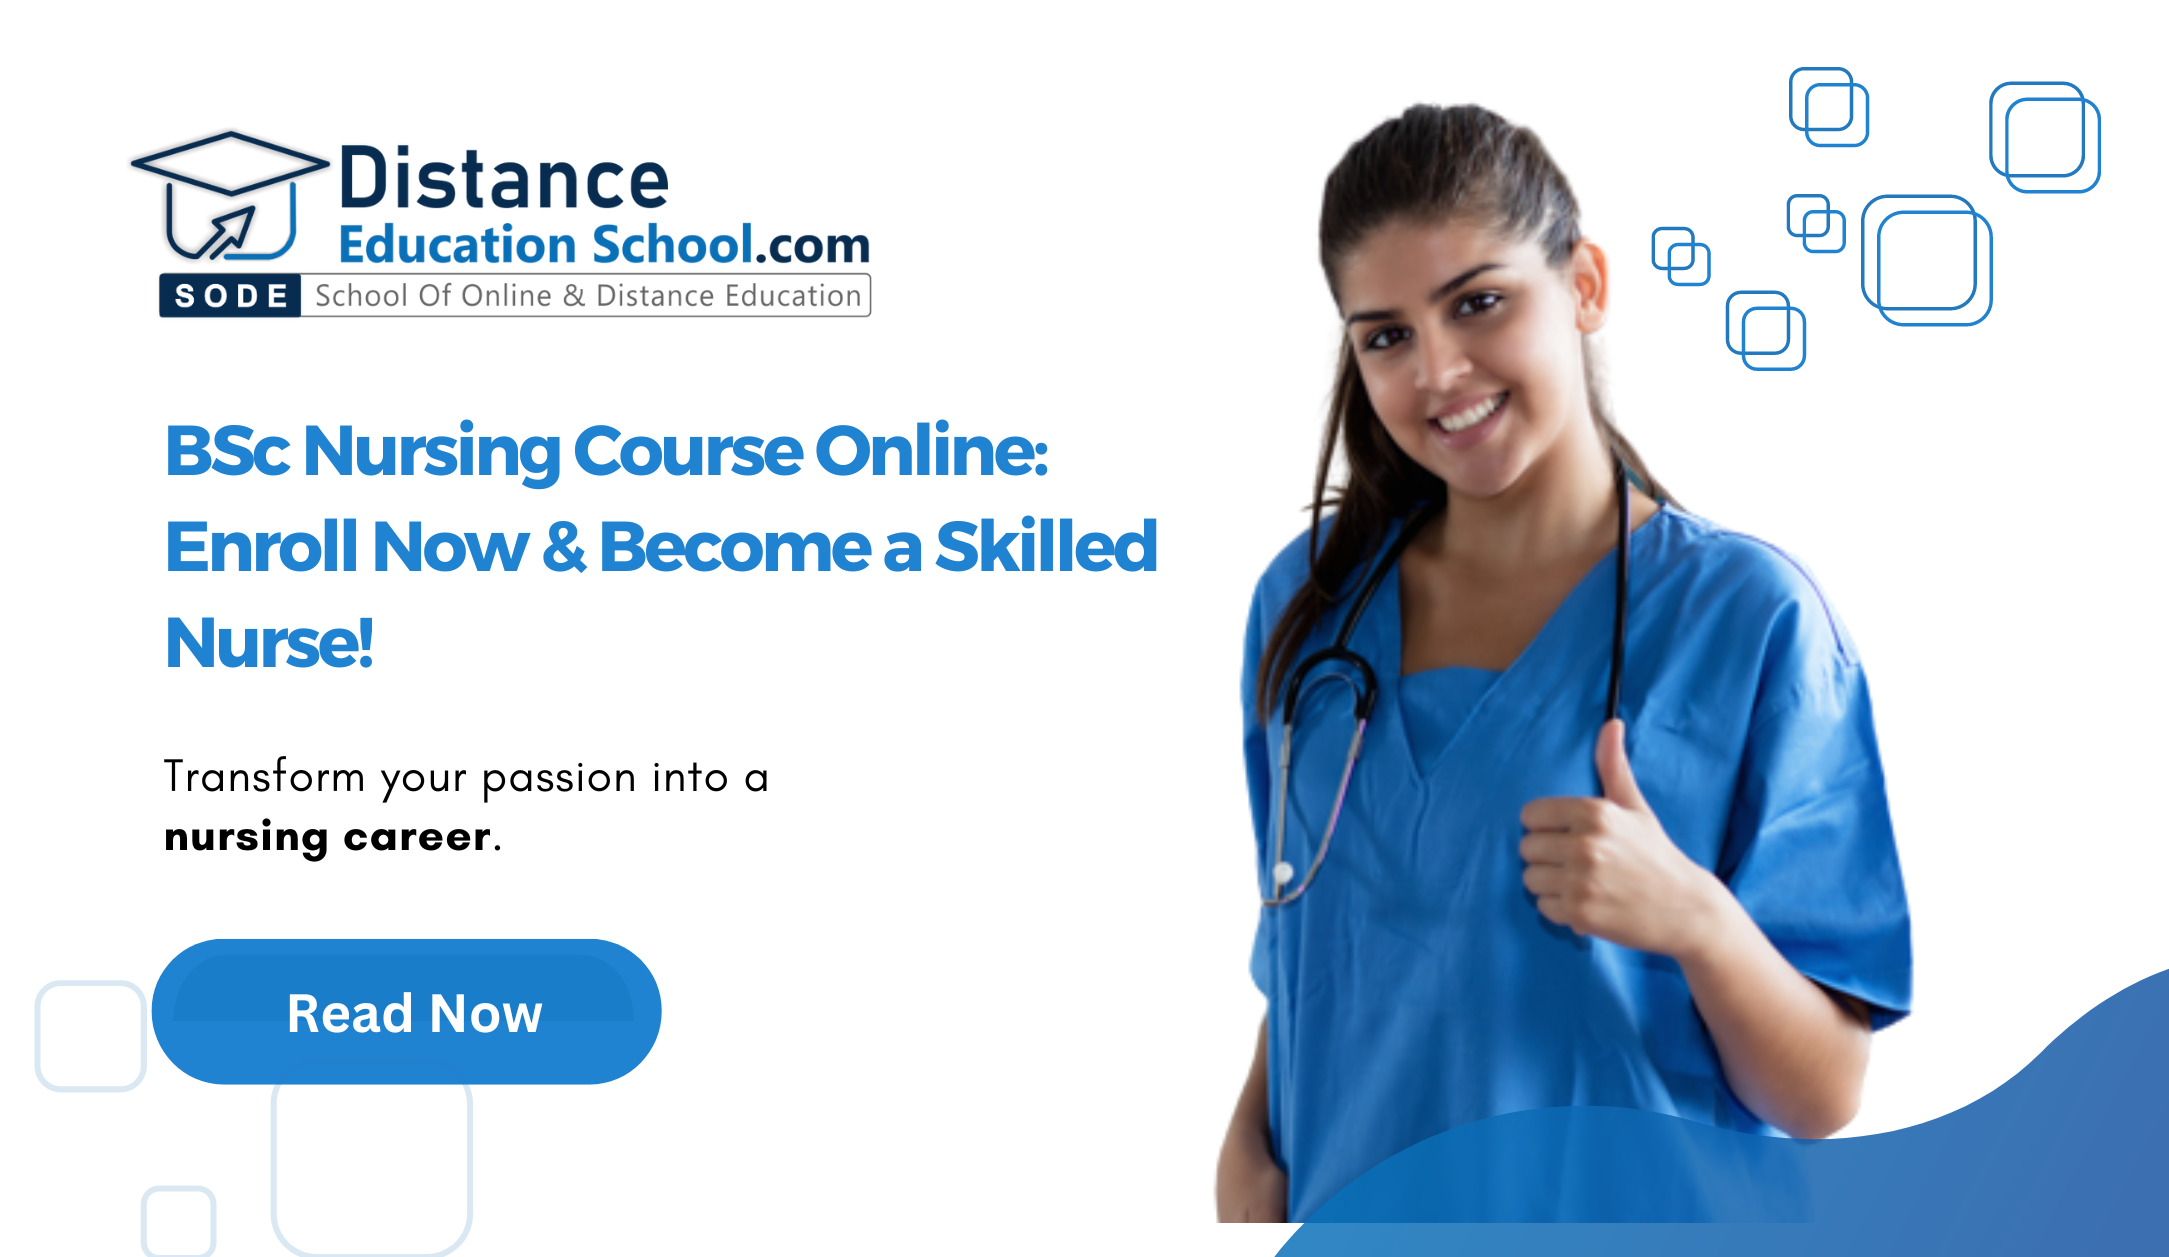 BSc Nursing Course Online: Enroll Now & Become a Skilled Nurse!